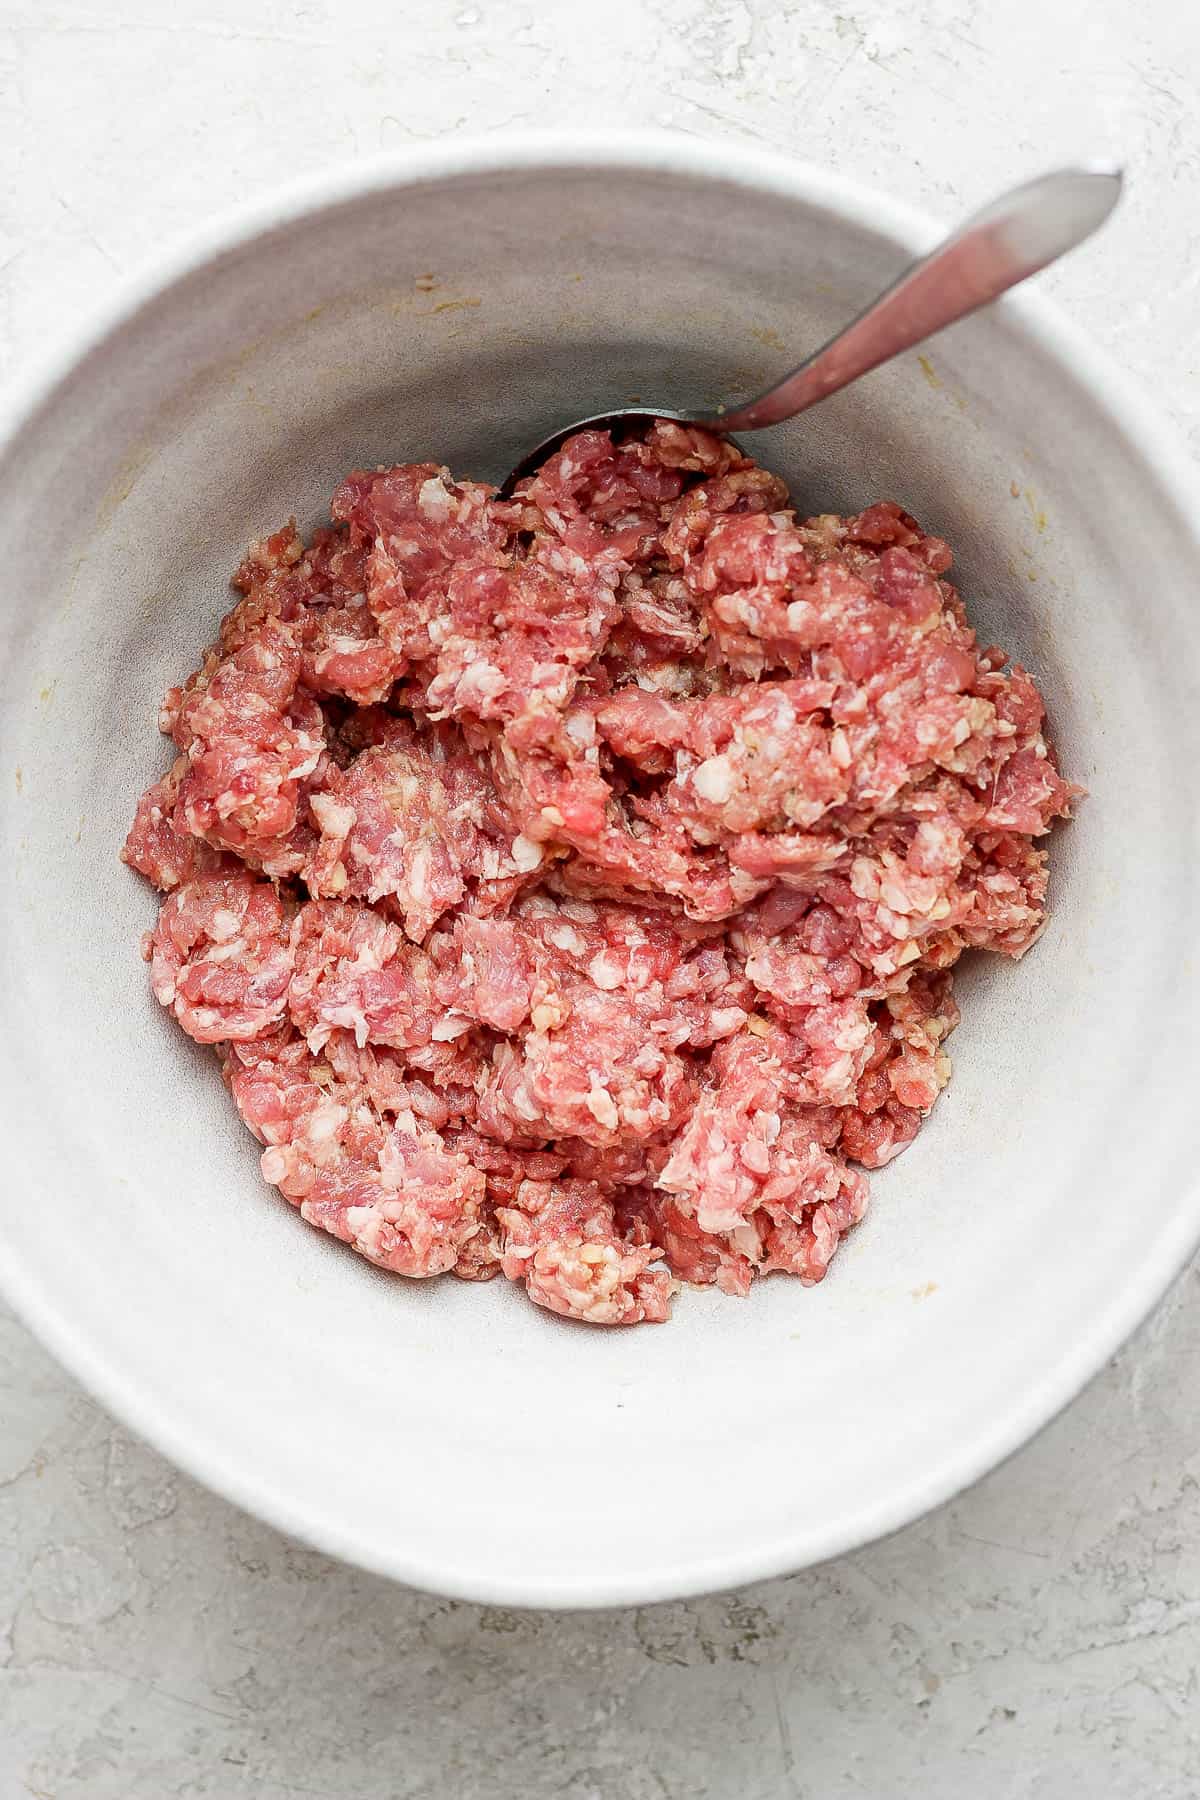 Pork burger ingredients all mixed together in a mixing bowl with a spoon.